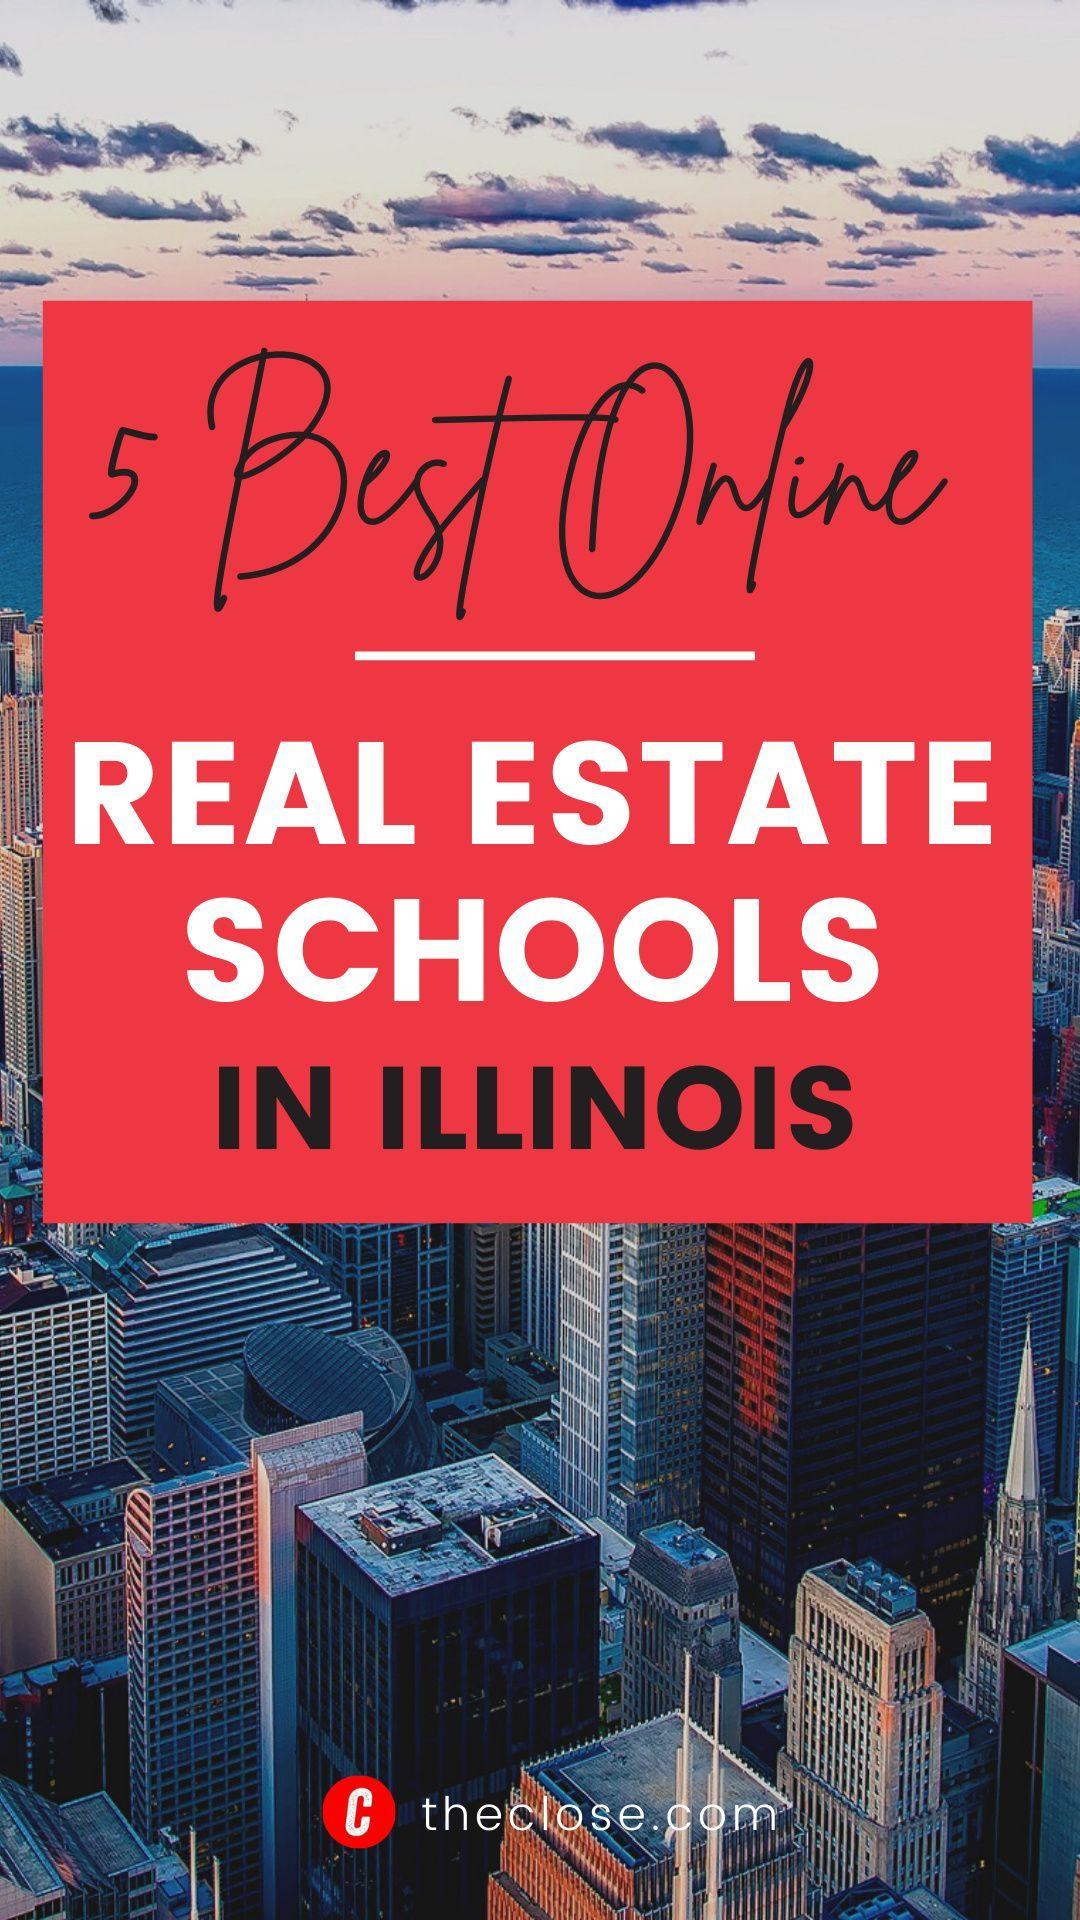 How much is real estate school in illinois